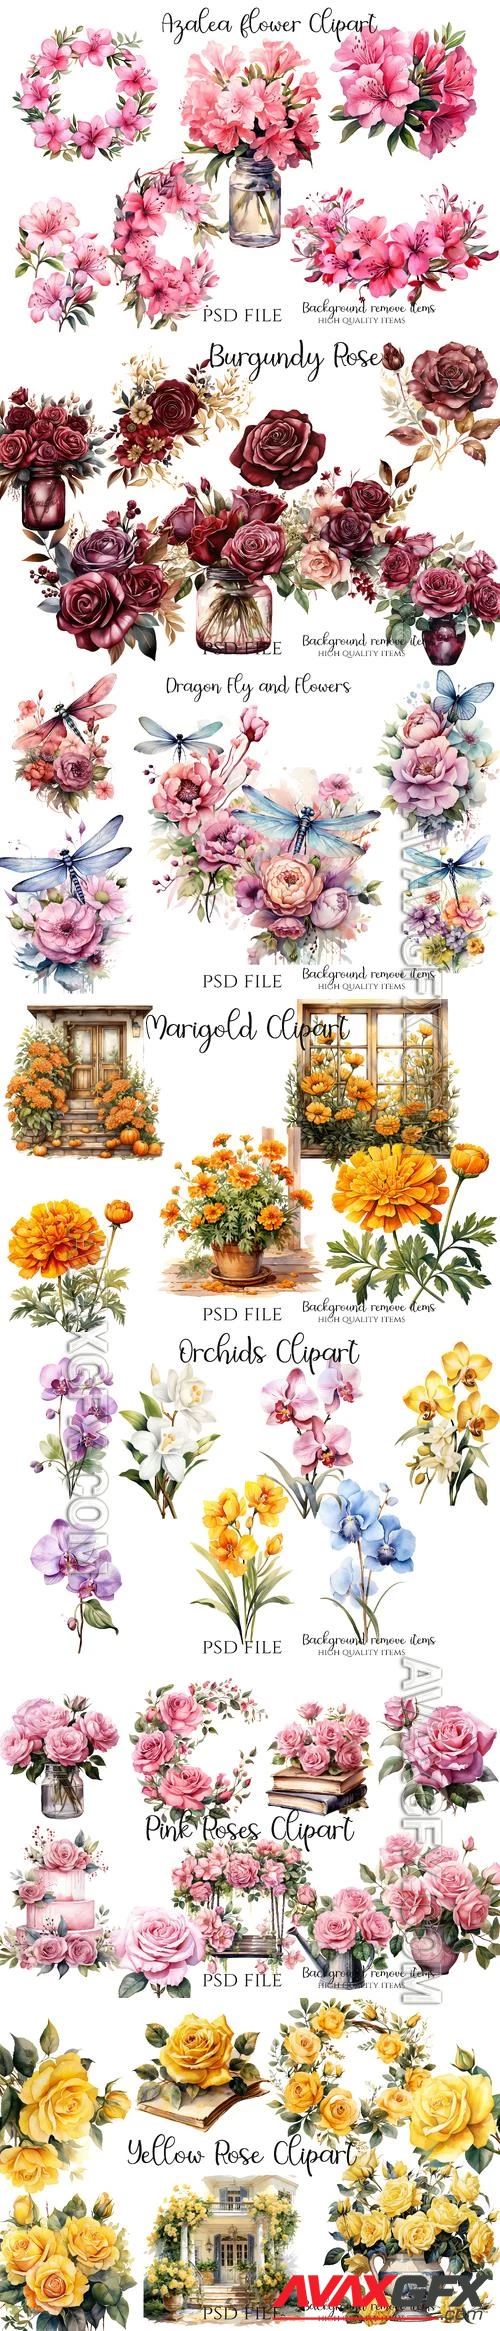 Flowers, roses, orchids, marigold, wildflowers, dragonfly - PSD illustration cliparts set